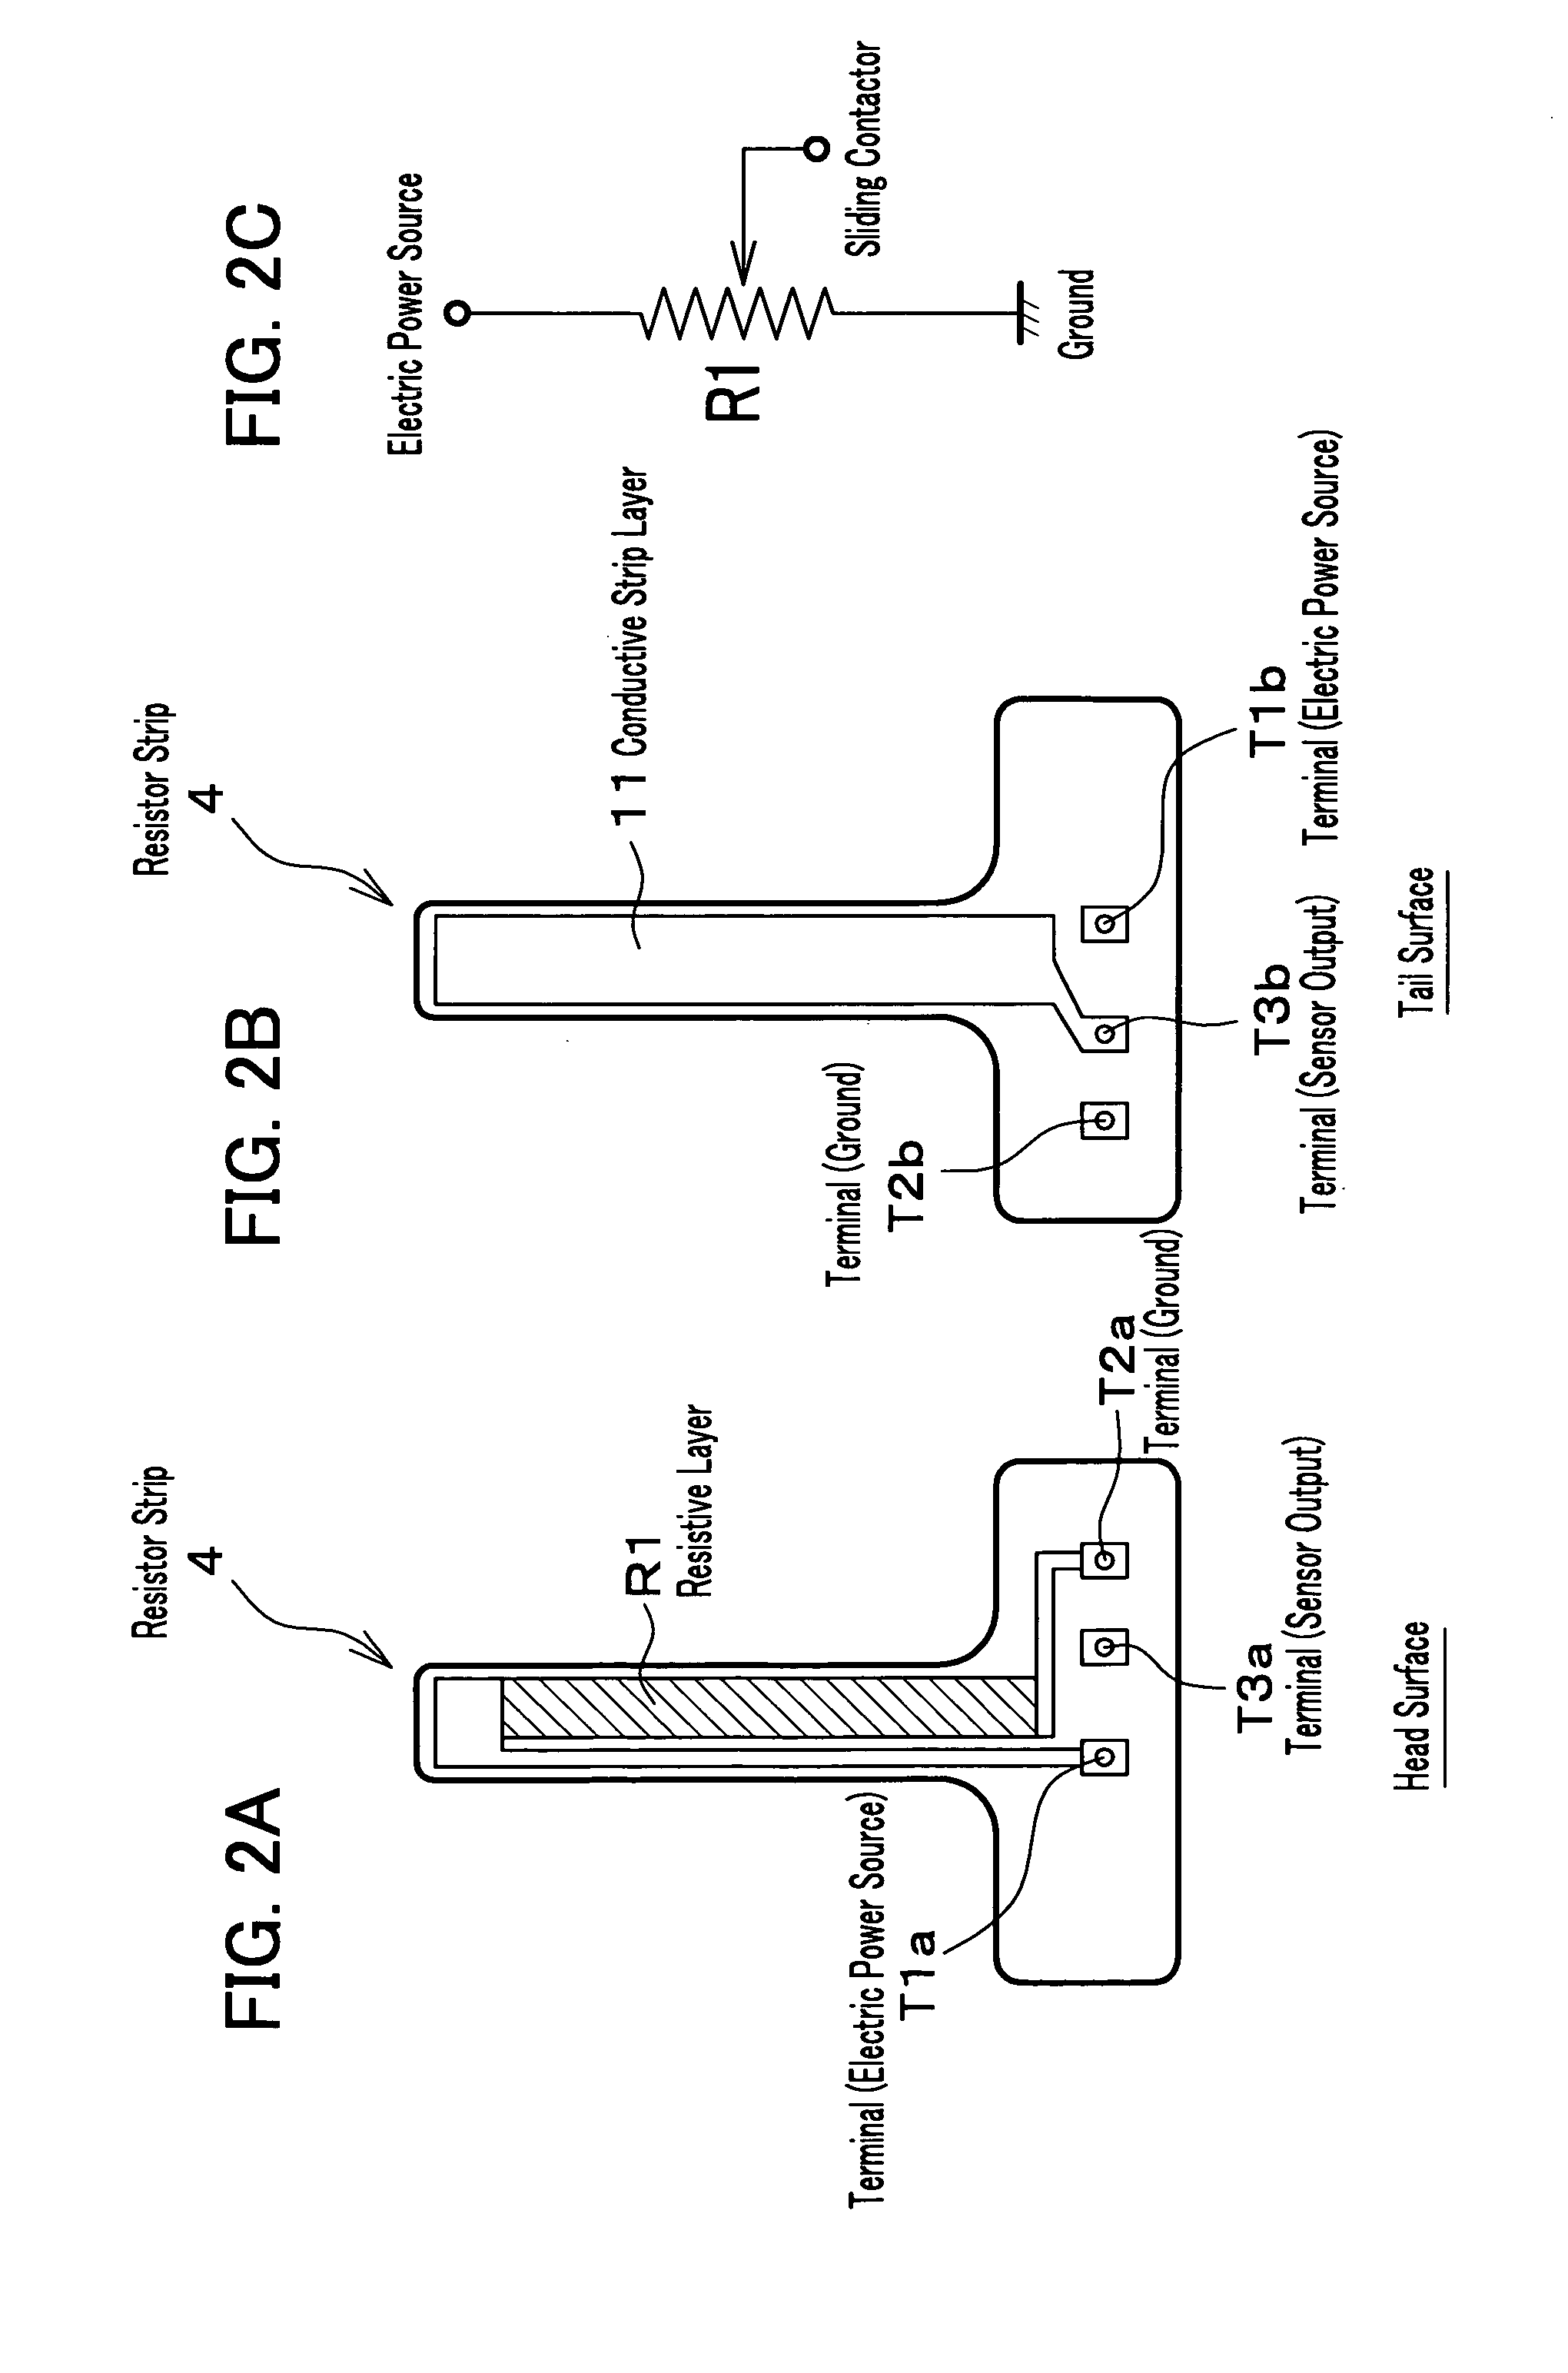 Mirror angle transducer and mirror tilting mechanism